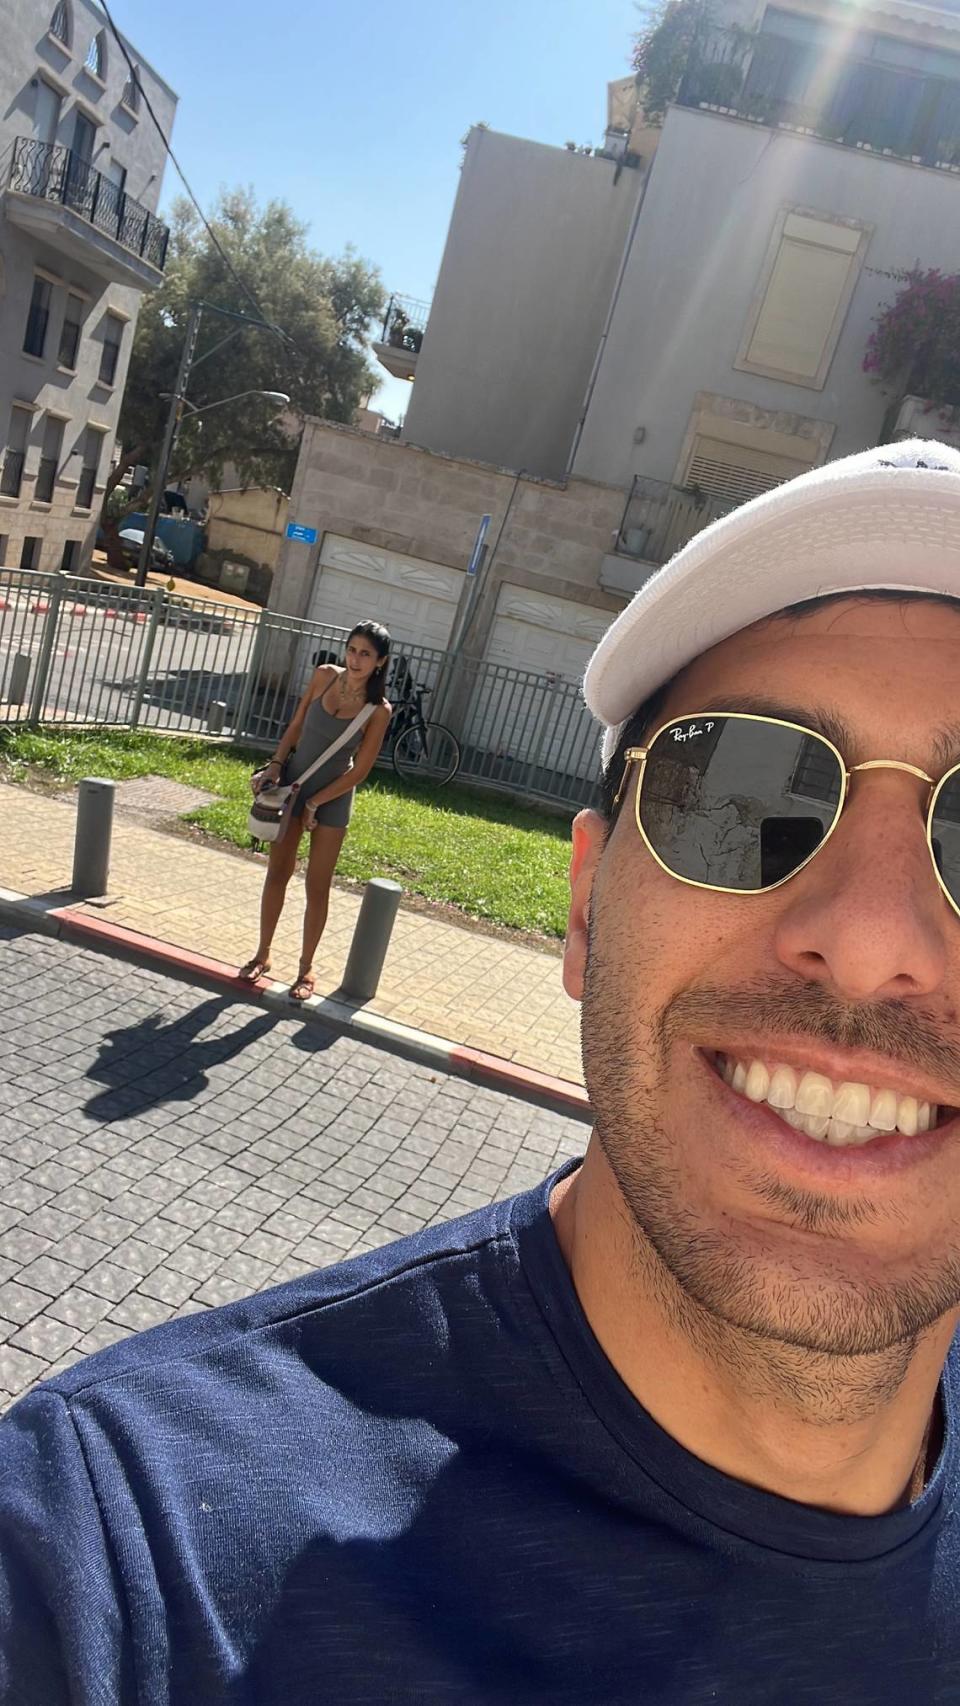 Guy Gil, a 29-year-old real estate developer from Sunny Isles Beach, was visiting his family in Tel Aviv at the time of the Hamas attacks. The woman behind him is his 22-year-old cousin, who was attending the Supernova Music Festival near the Gaza Strip on Saturday, Oct. 7, 2023, where Hamas militants killed more than 260 Israelis and took people hostage. She was injured and hospitalized. The photo was taken about 10 hours before the festival. Guy Gil